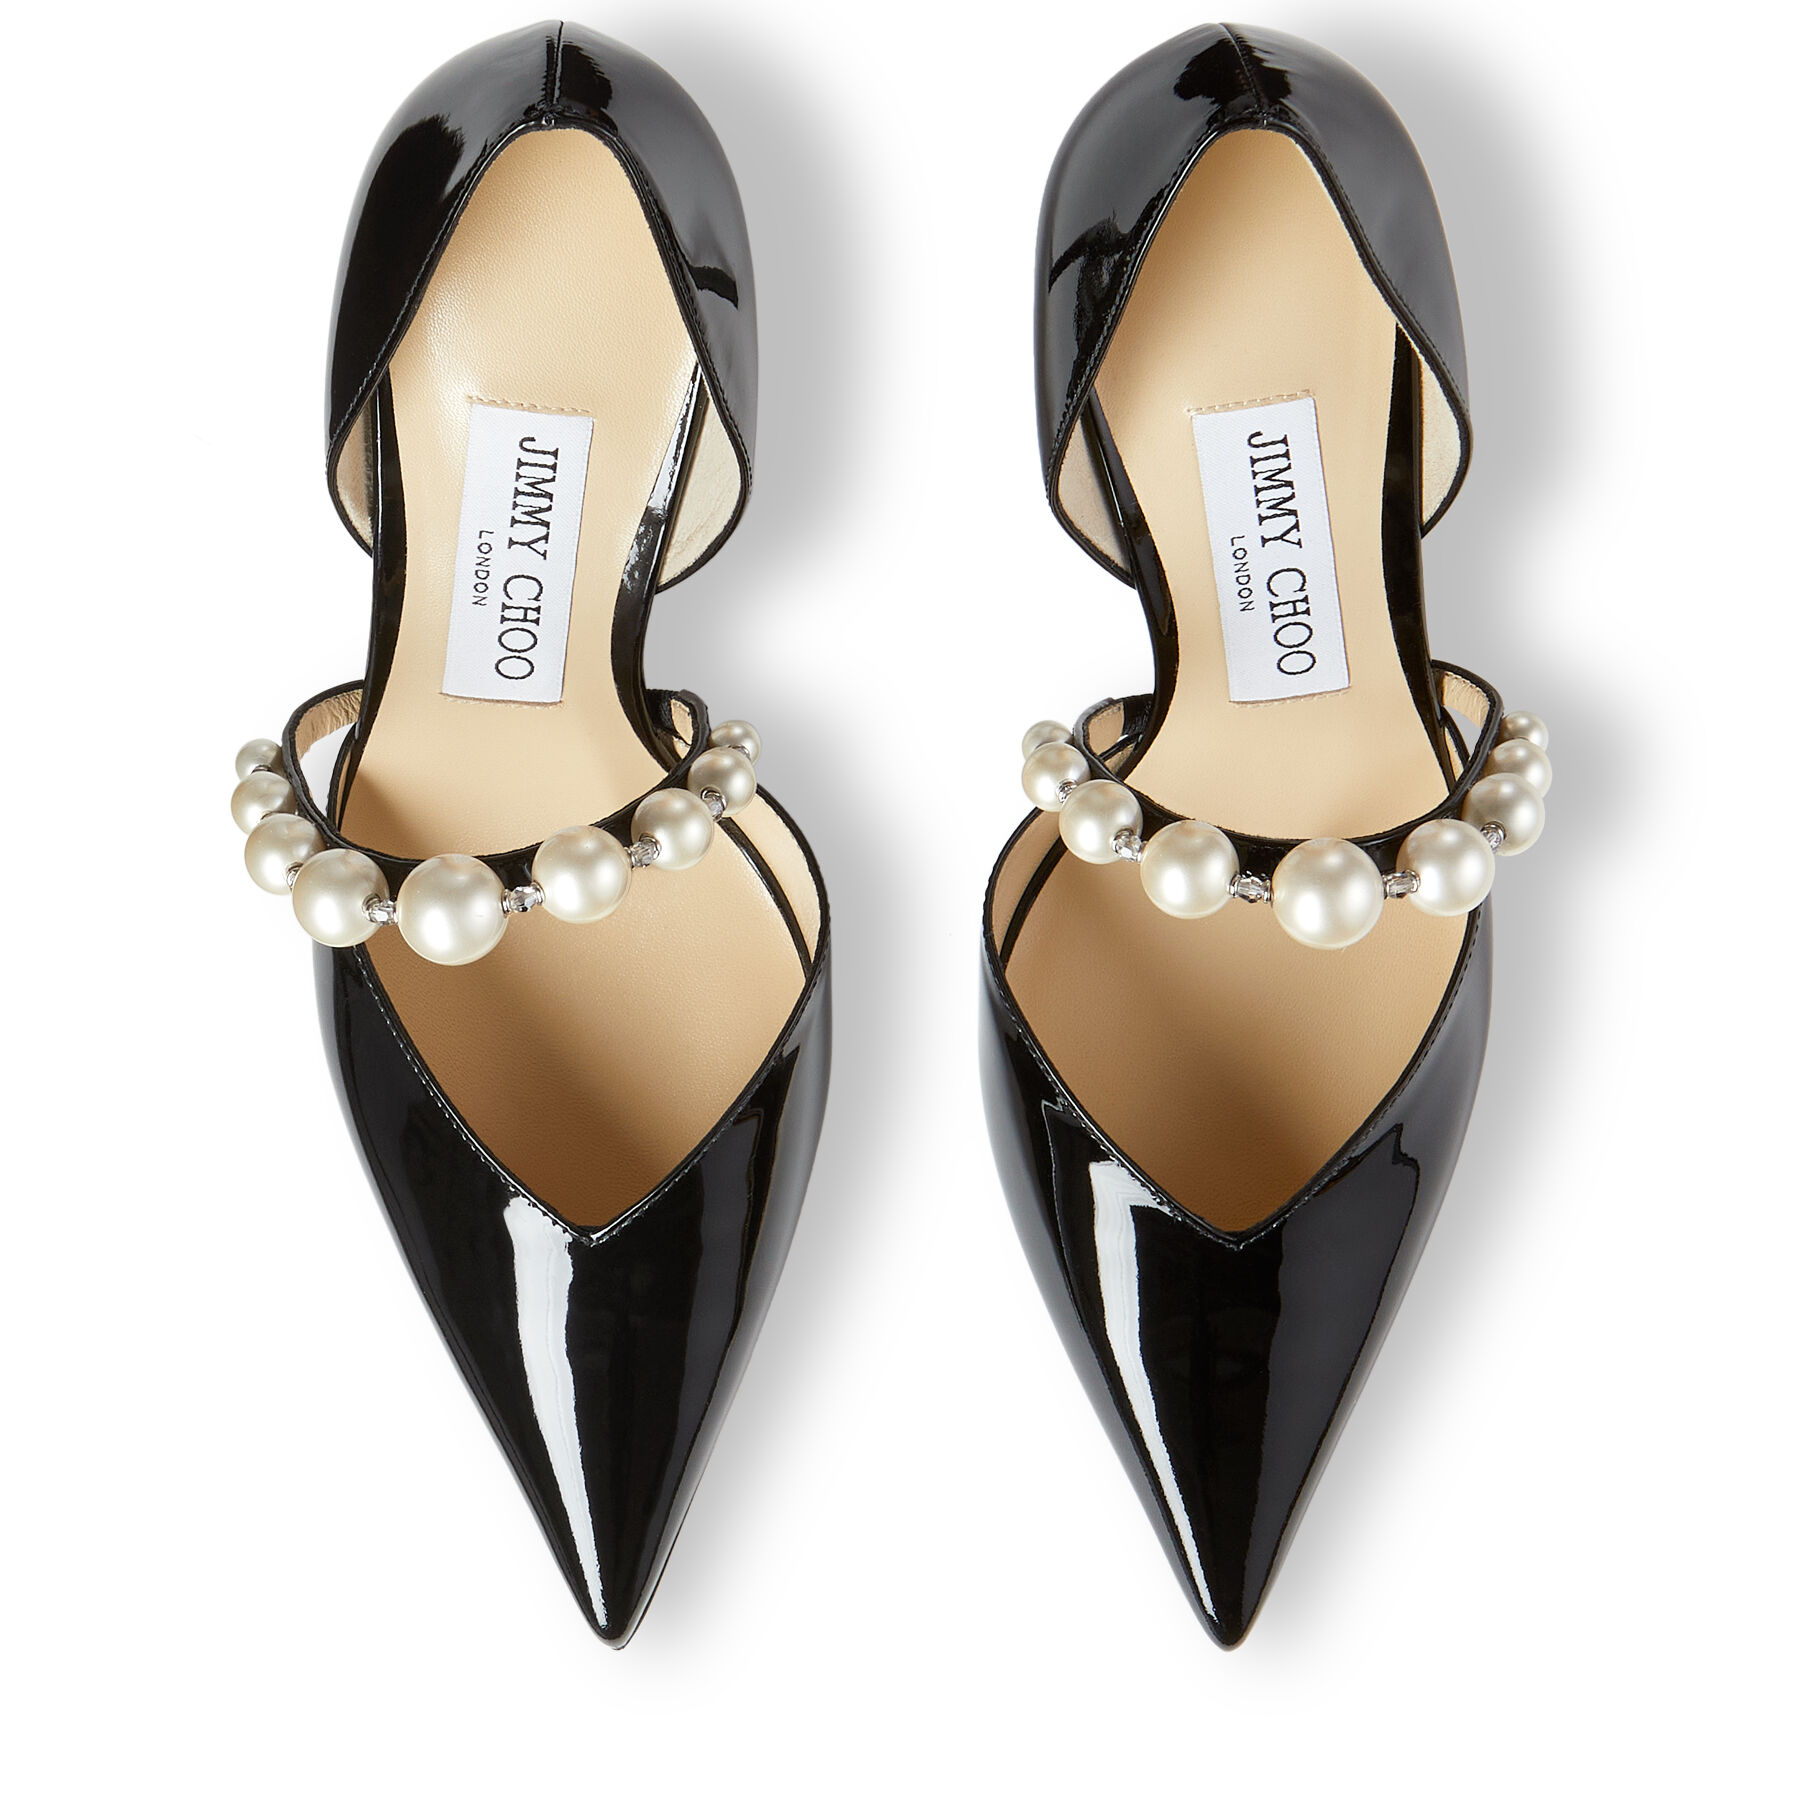 Black Patent Leather Pointed Pumps with Pearl Embellishment | AURELIE ...